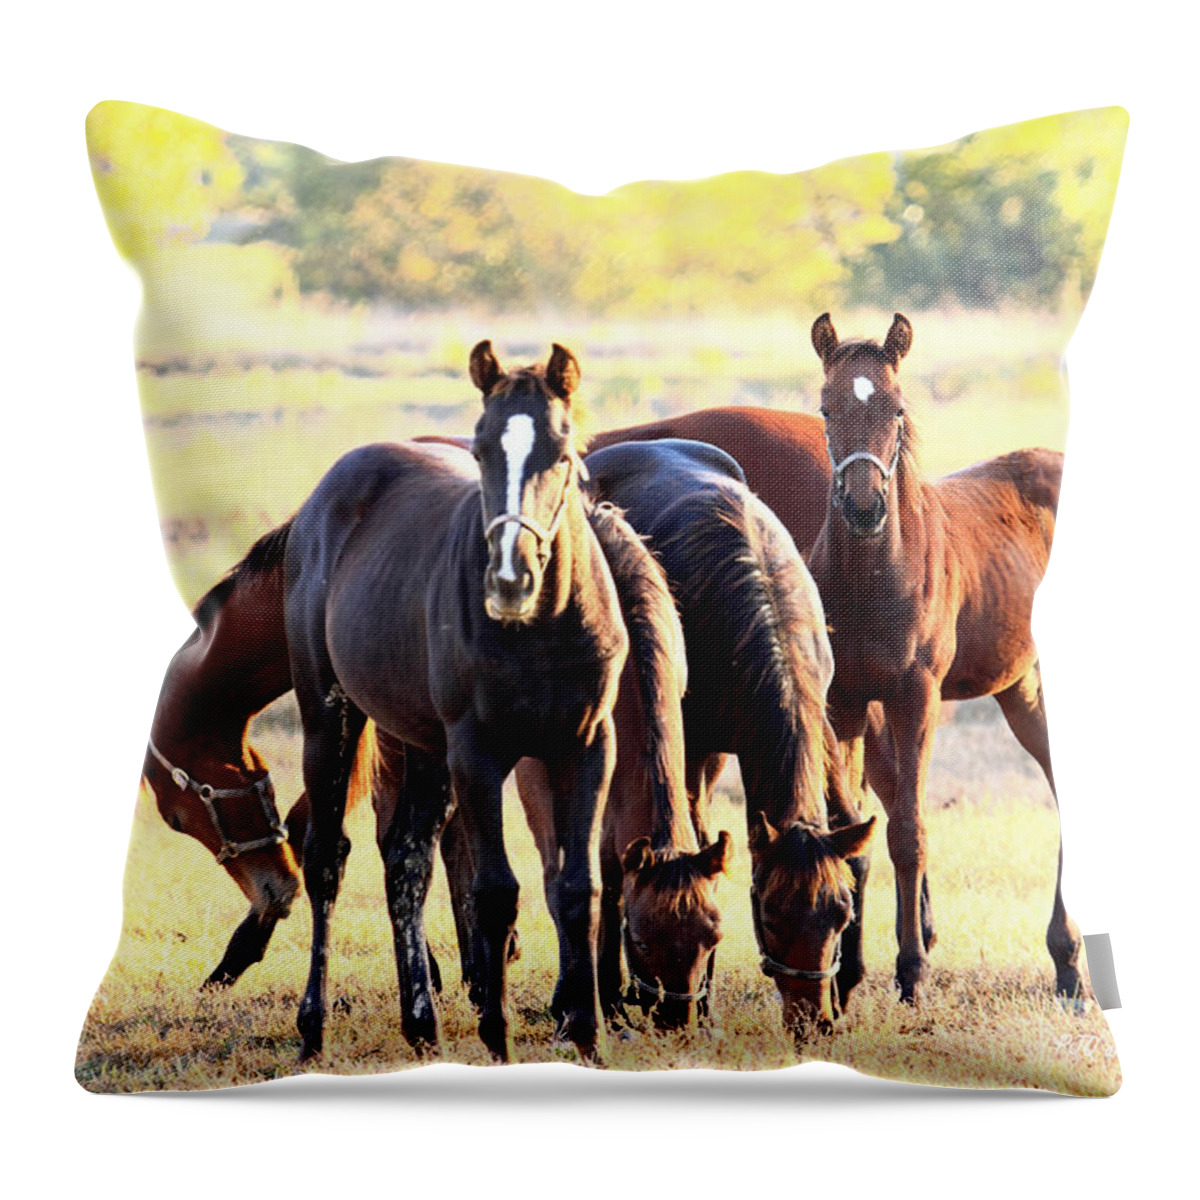  Throw Pillow featuring the photograph 'The Boys' by PJQandFriends Photography